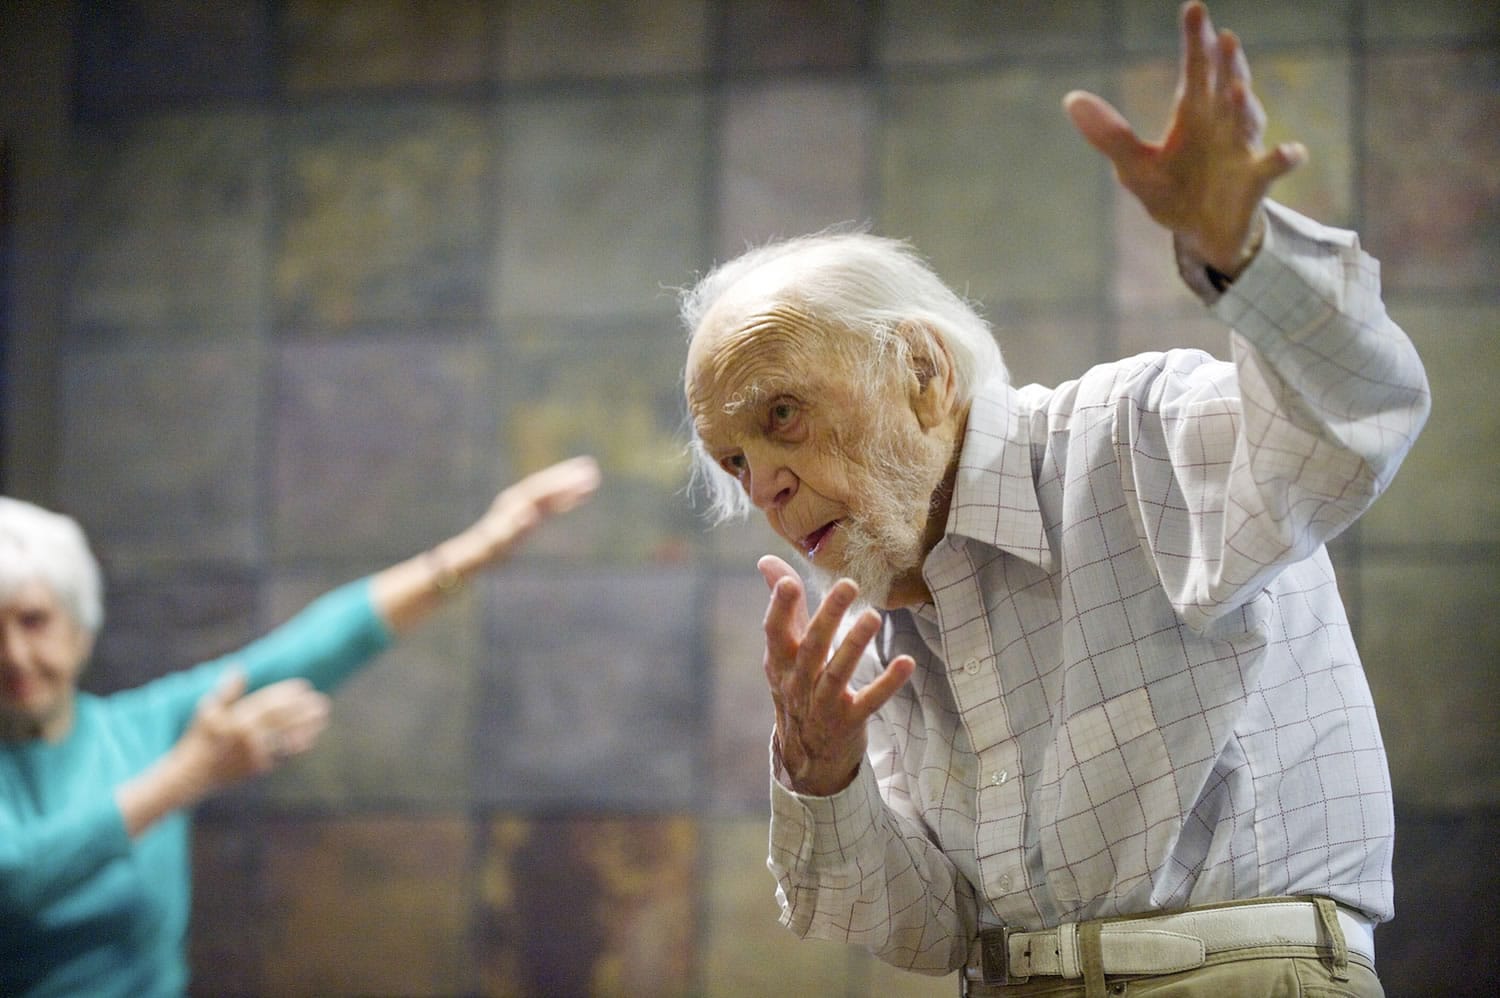 Harris Dusenbery, 100, takes part in an exercise class at his condo with other Heritage Place residents.